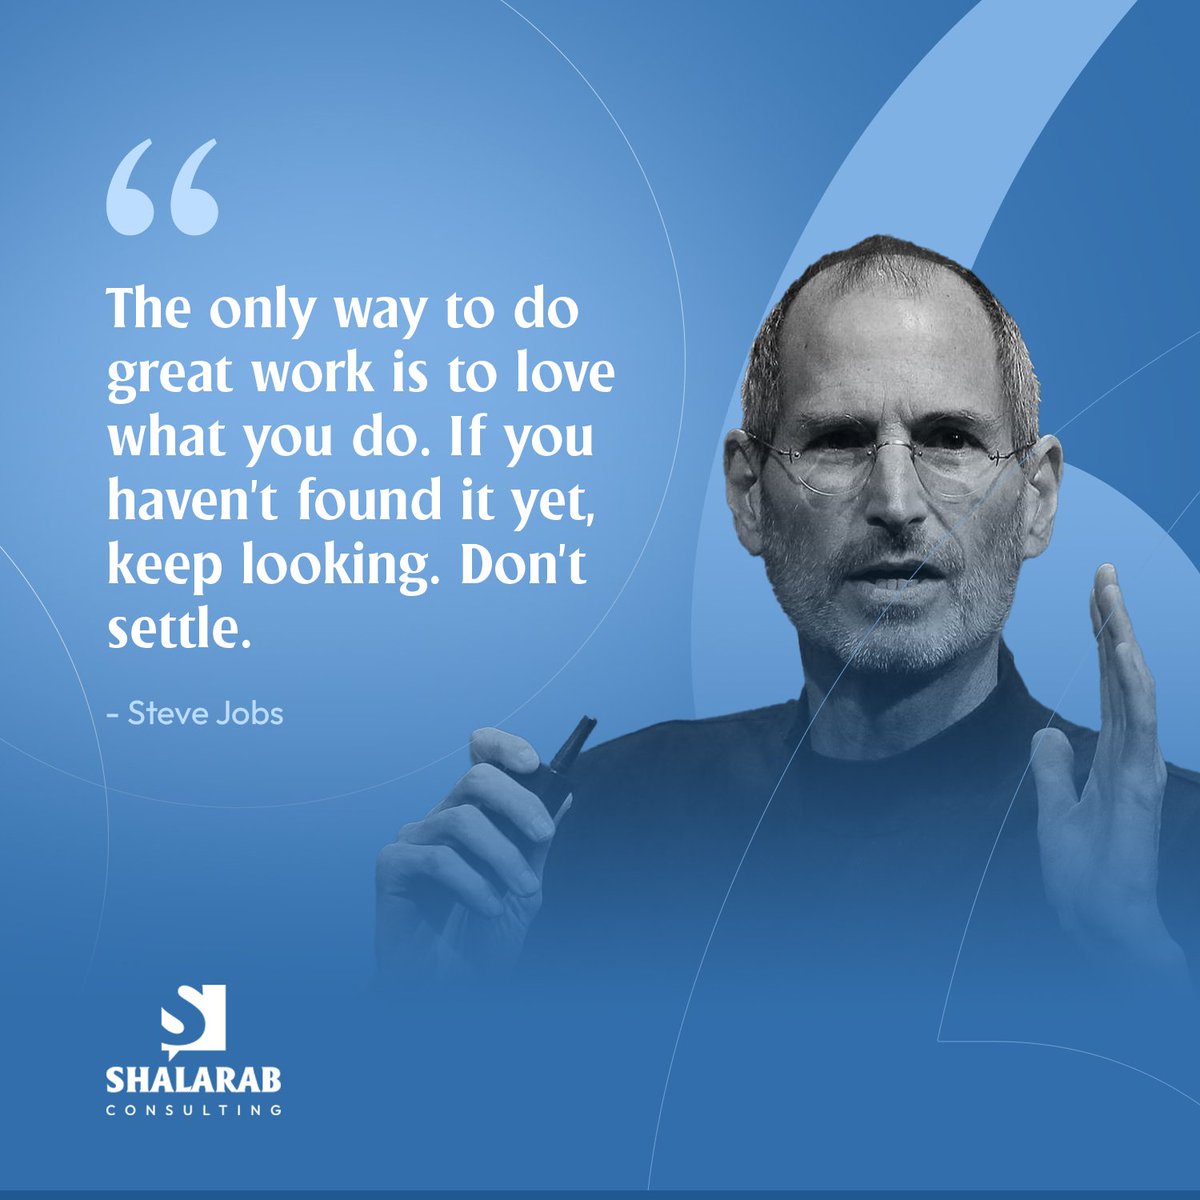 Boost your morale this new week with these powerful words from Steve Jobs.

Don't settle!

Let's start the week with a renewed determination to pursue our goals and never settle for anything less than greatness.

#shalarabconsulting #mondaymotivations #stevejobs